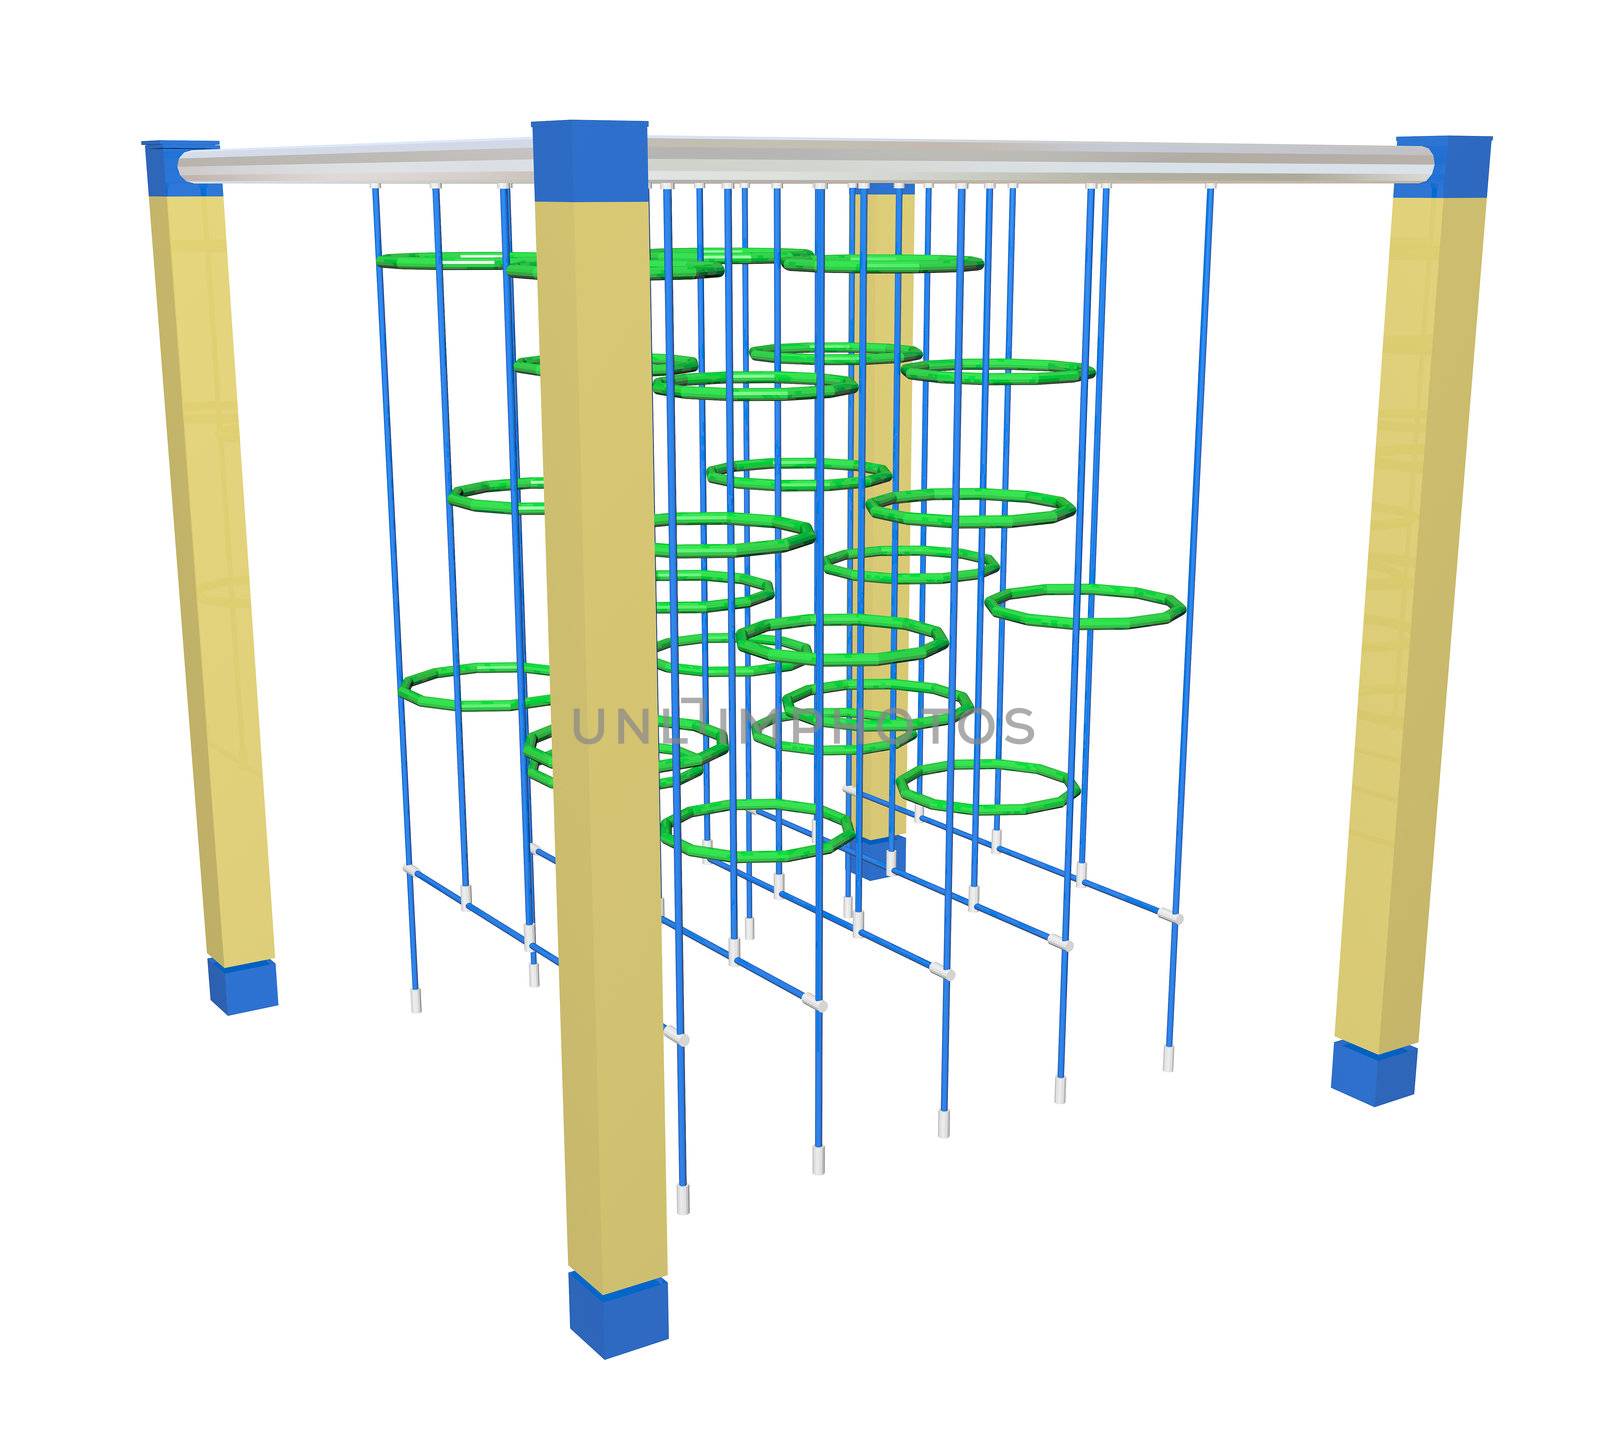 Climbing bars and rings, green blue and yellow, 3D illustration, isolated against a white background.